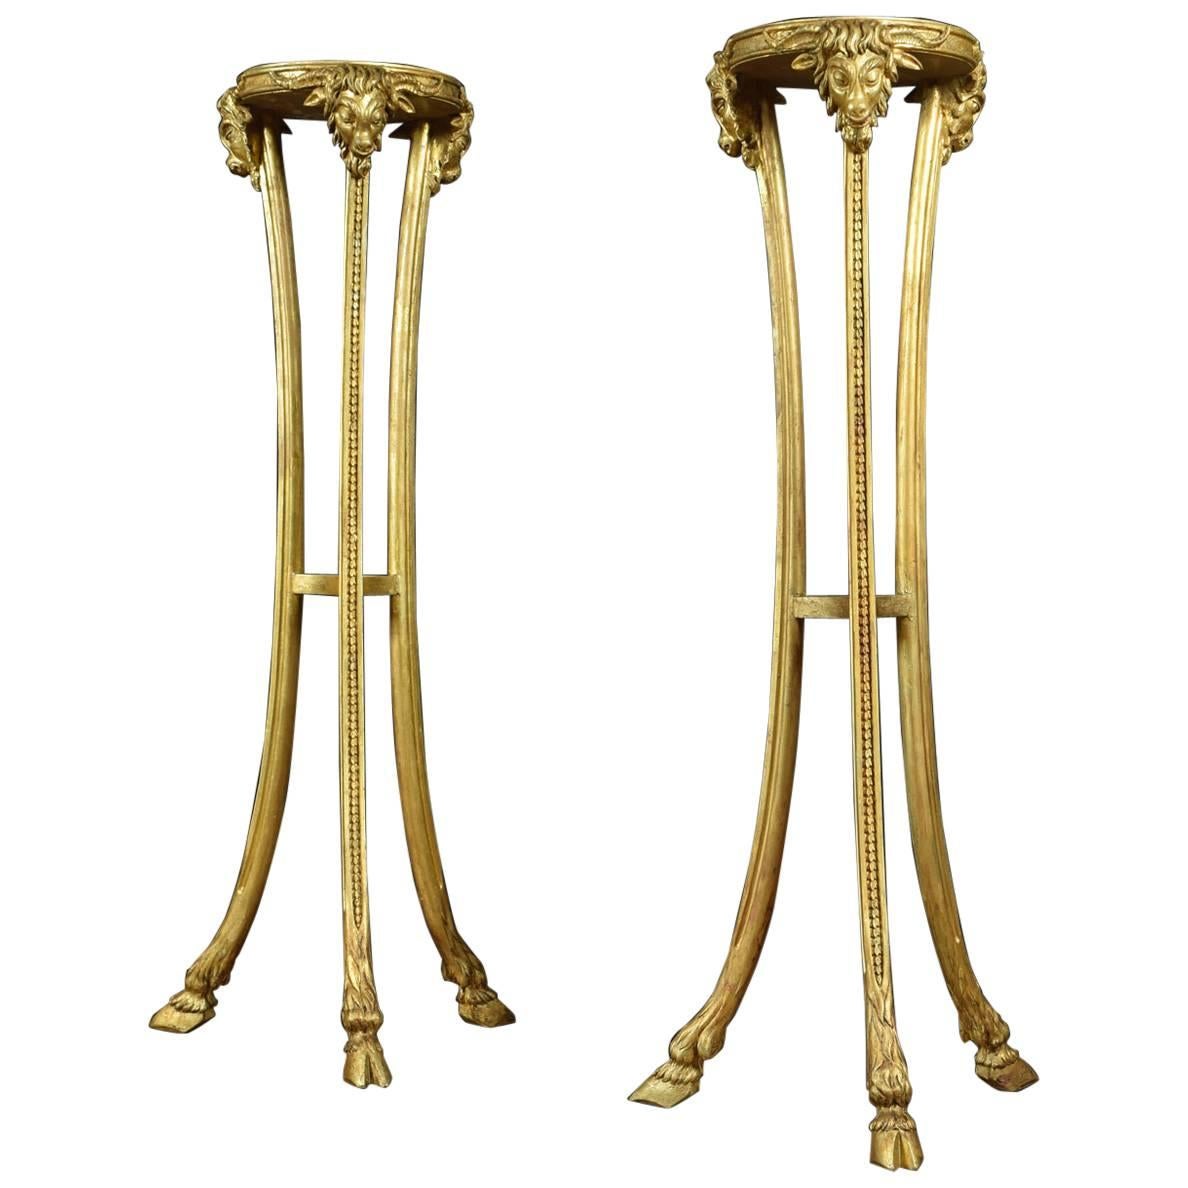 Pair of Early 19th Century Carved Giltwood Torchers